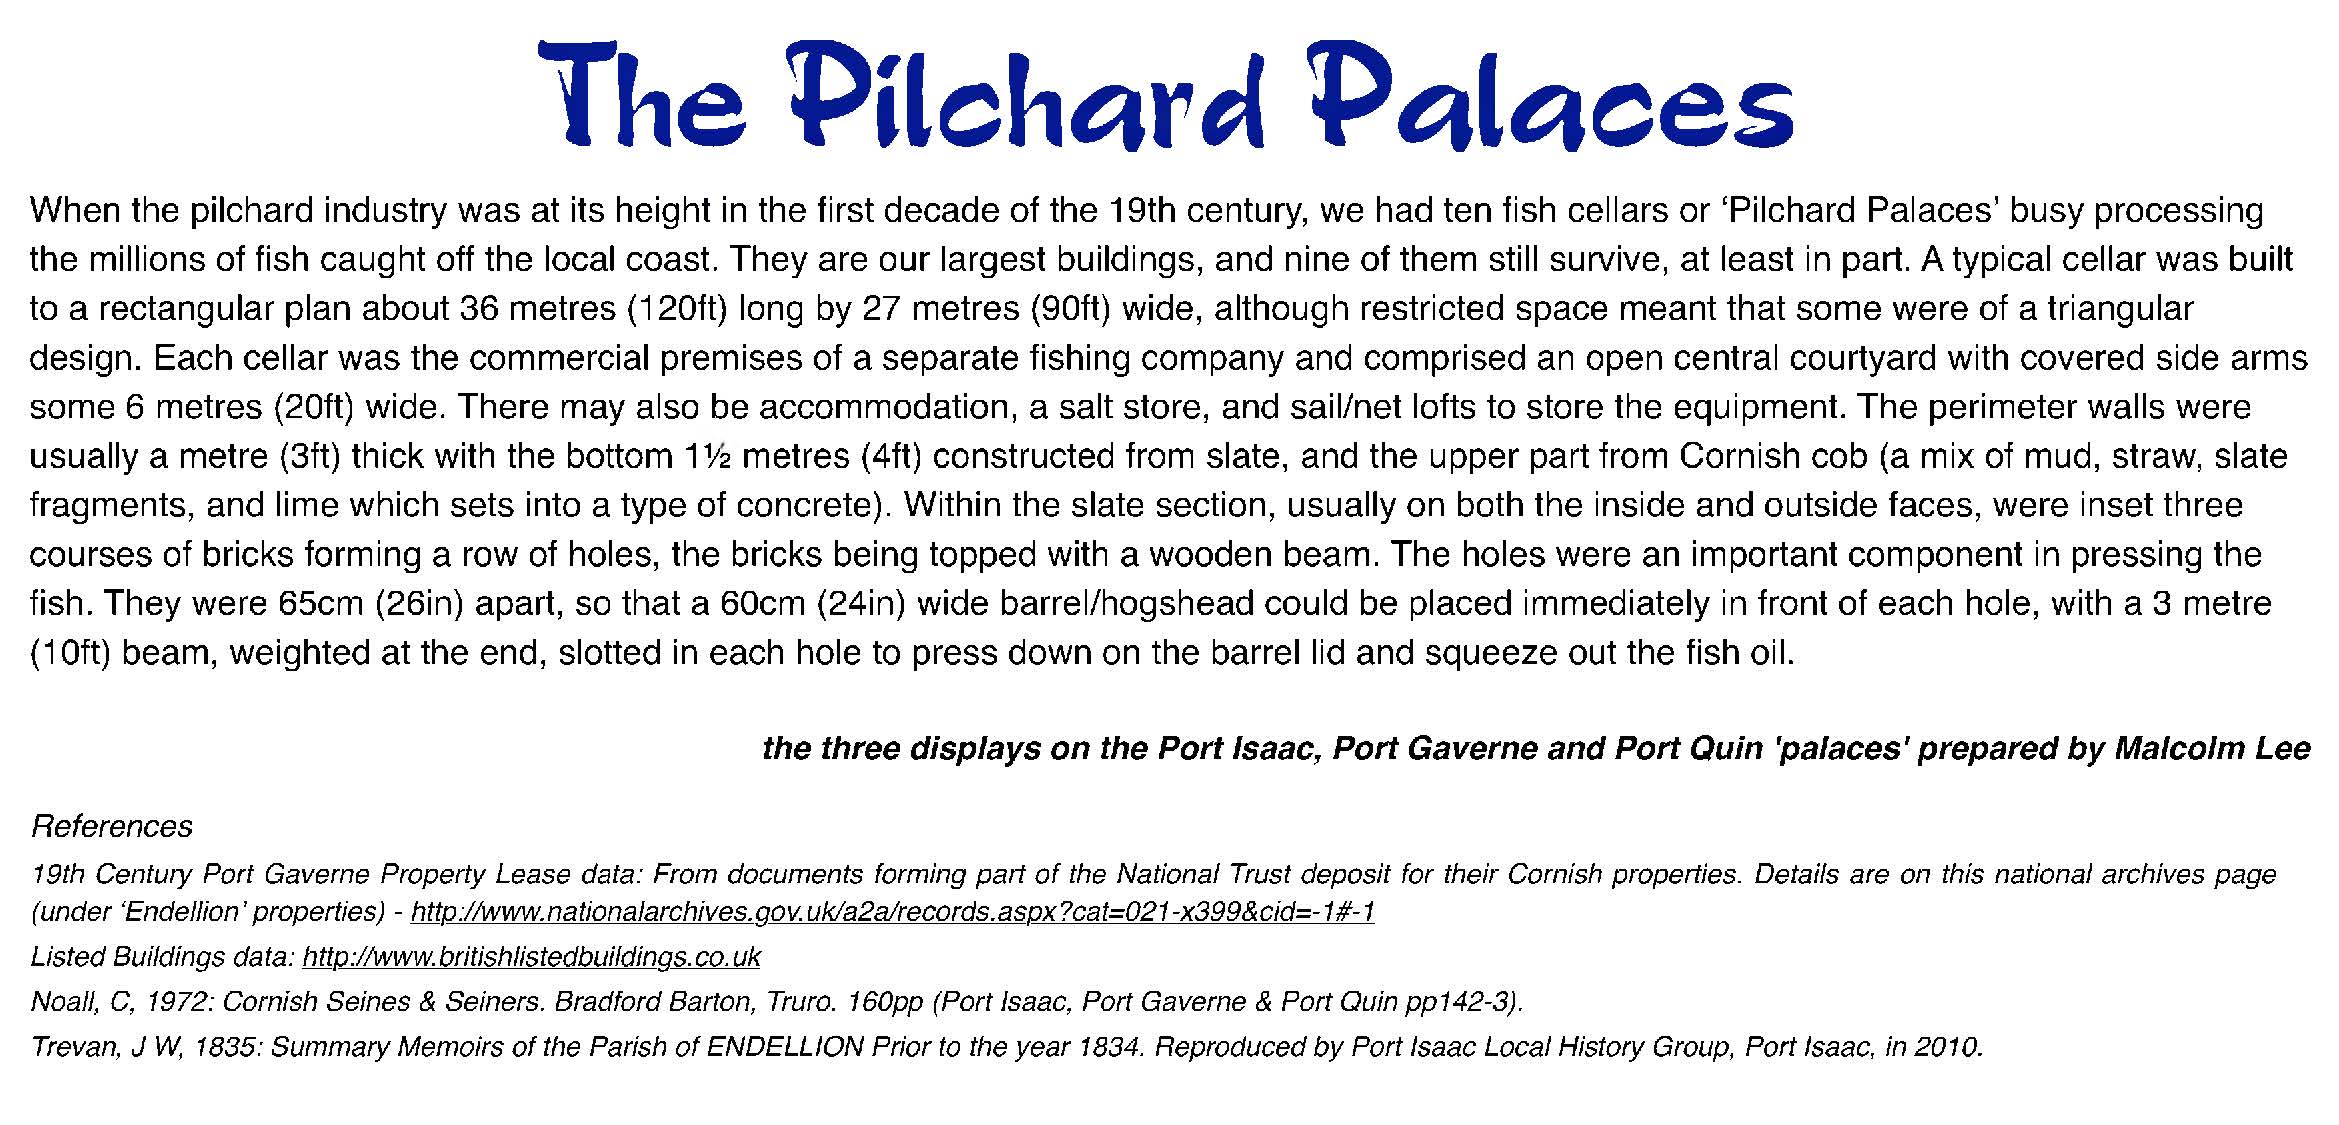 The Pilchard Palaces